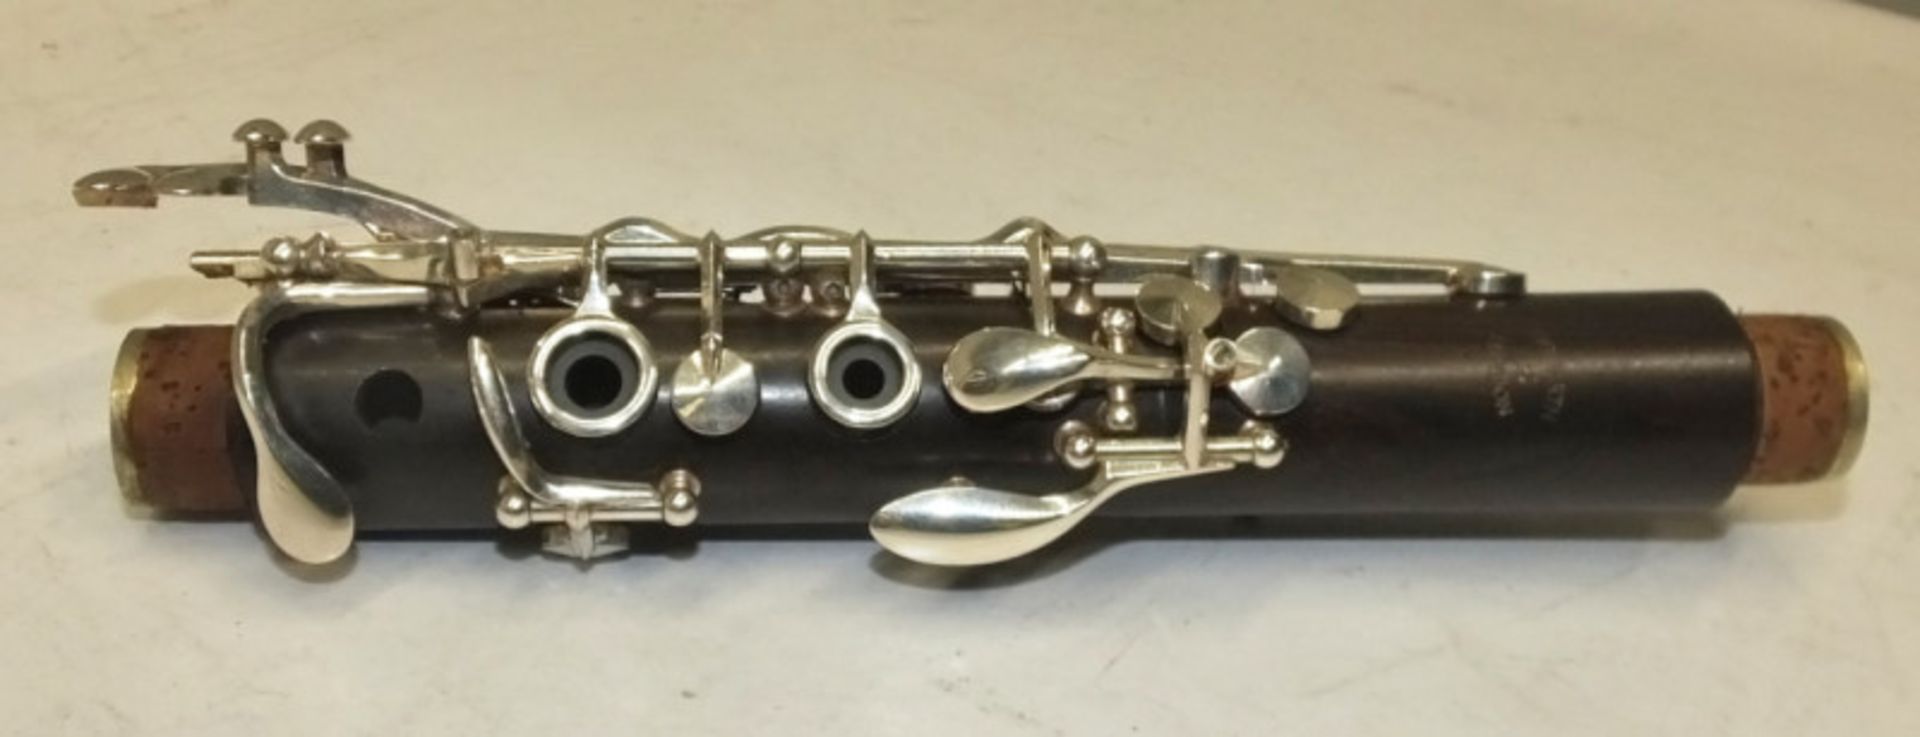 Howarth S2 Clarinet in case - Serial Number - 2228. - Image 8 of 17